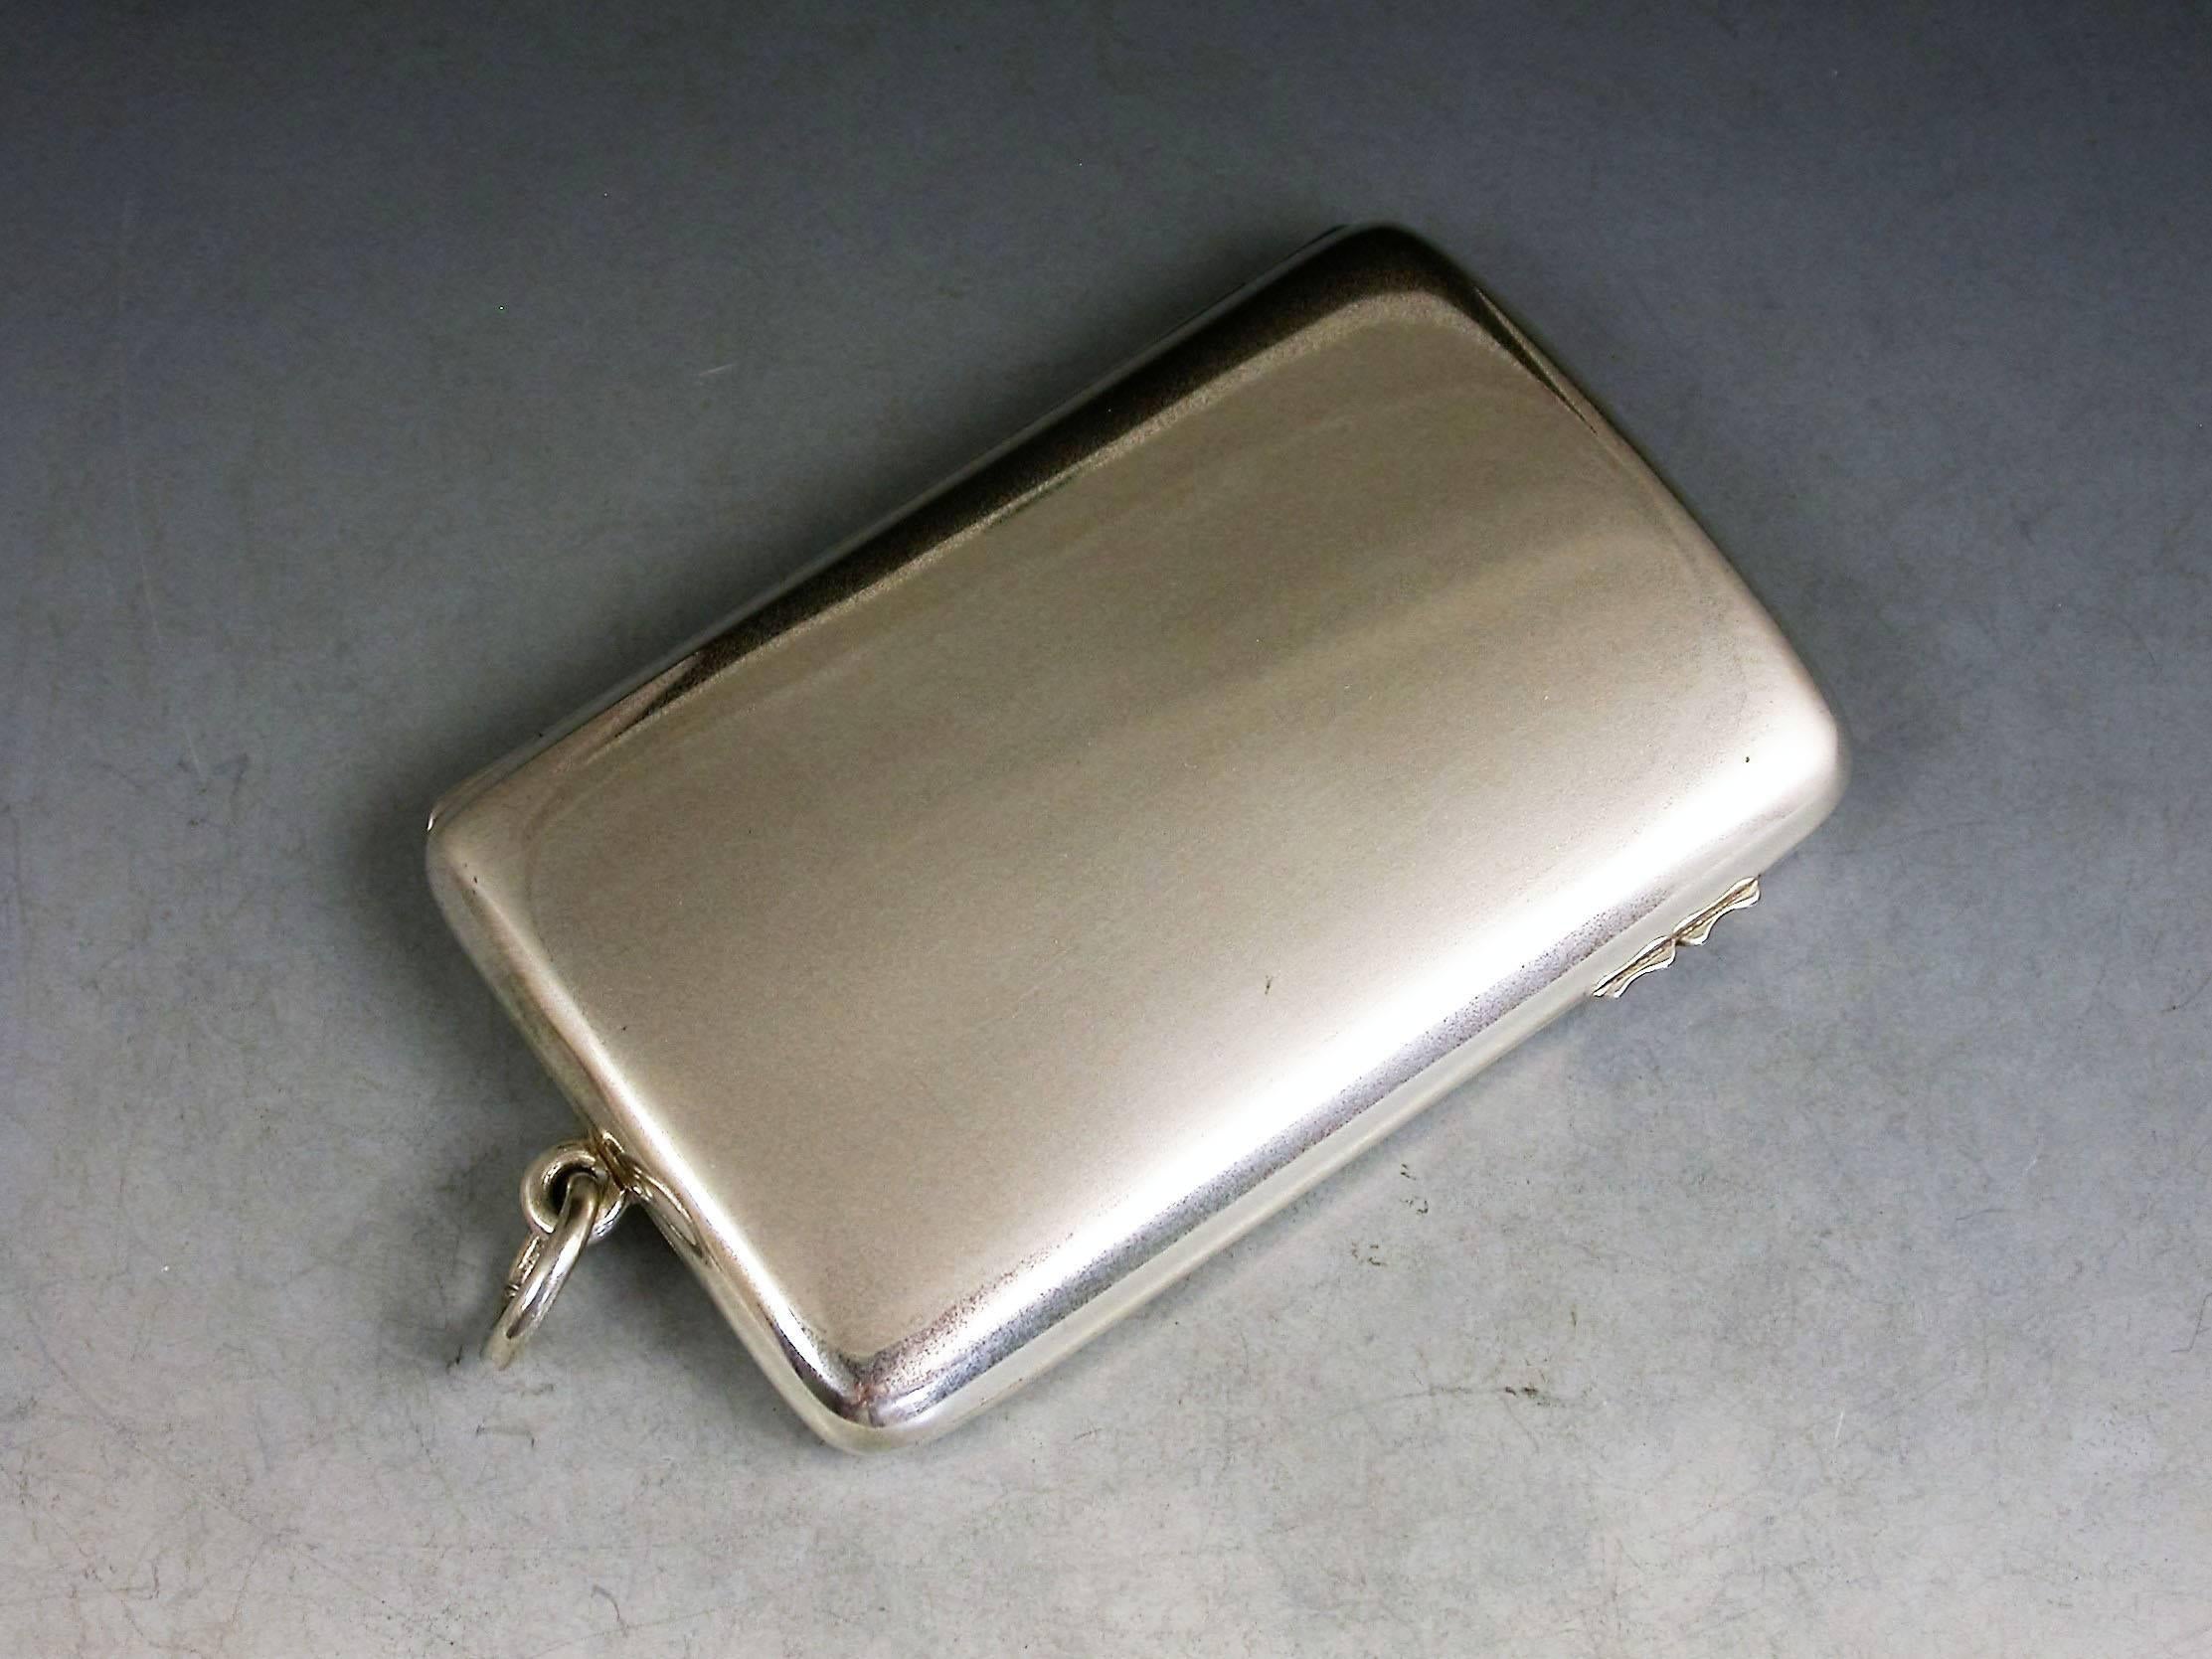 A rare and large Victorian silver triple sovereign and note holder case of plain curved rectangular form with attached suspension ring and sprung hinge. The silver gilt interior with three sprung sections to accept full (2) and half sovereigns (1).